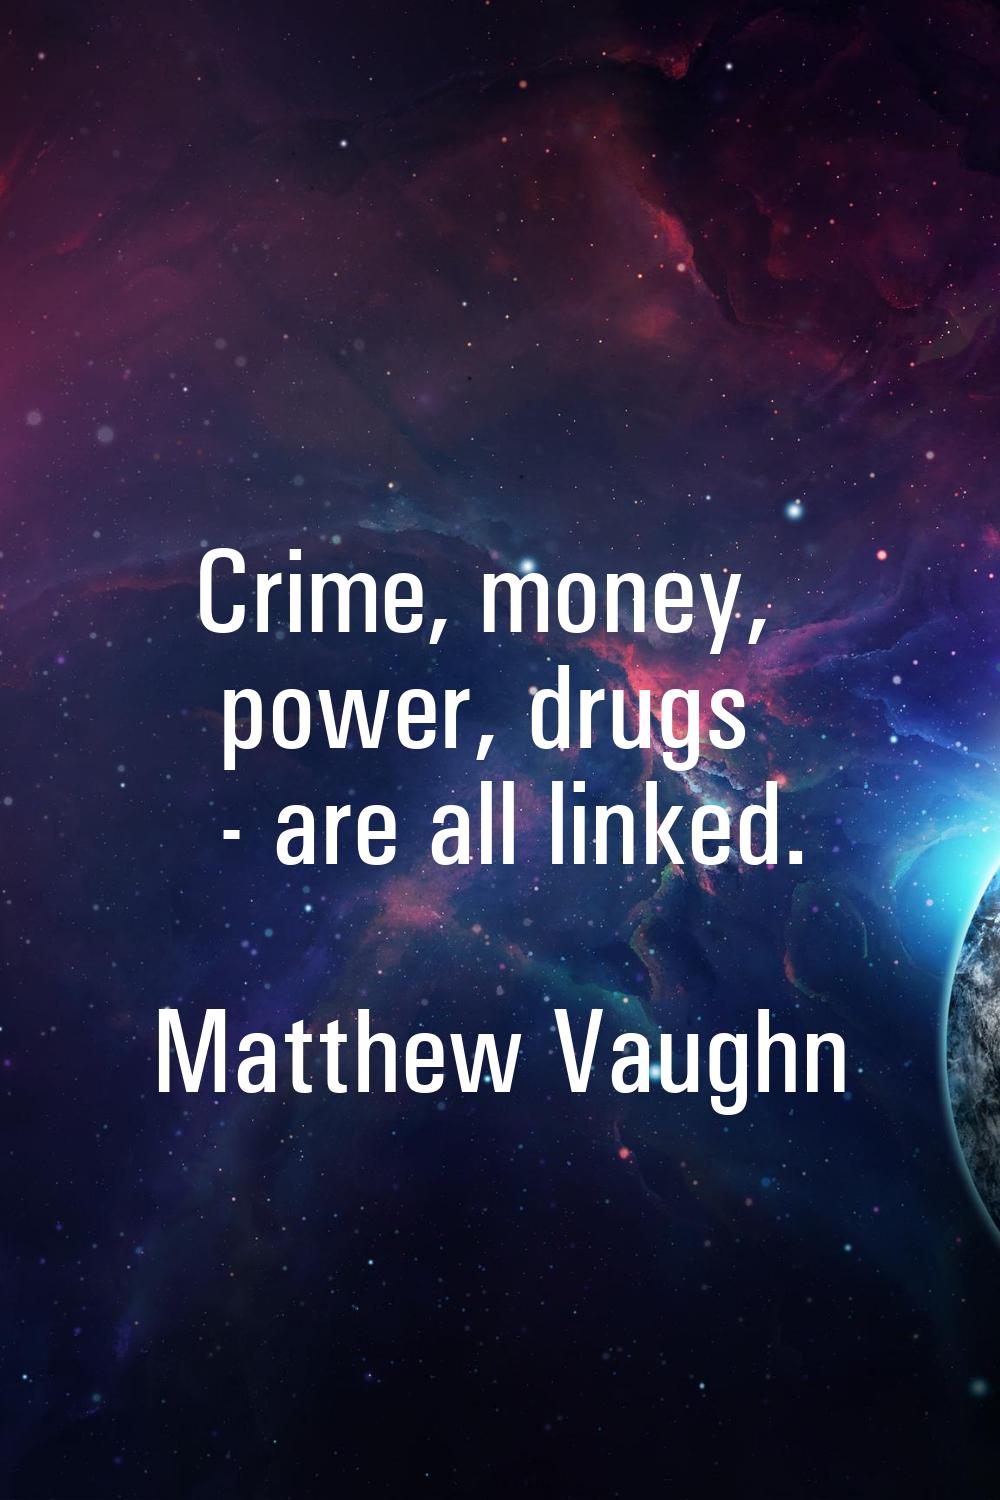 Crime, money, power, drugs - are all linked.